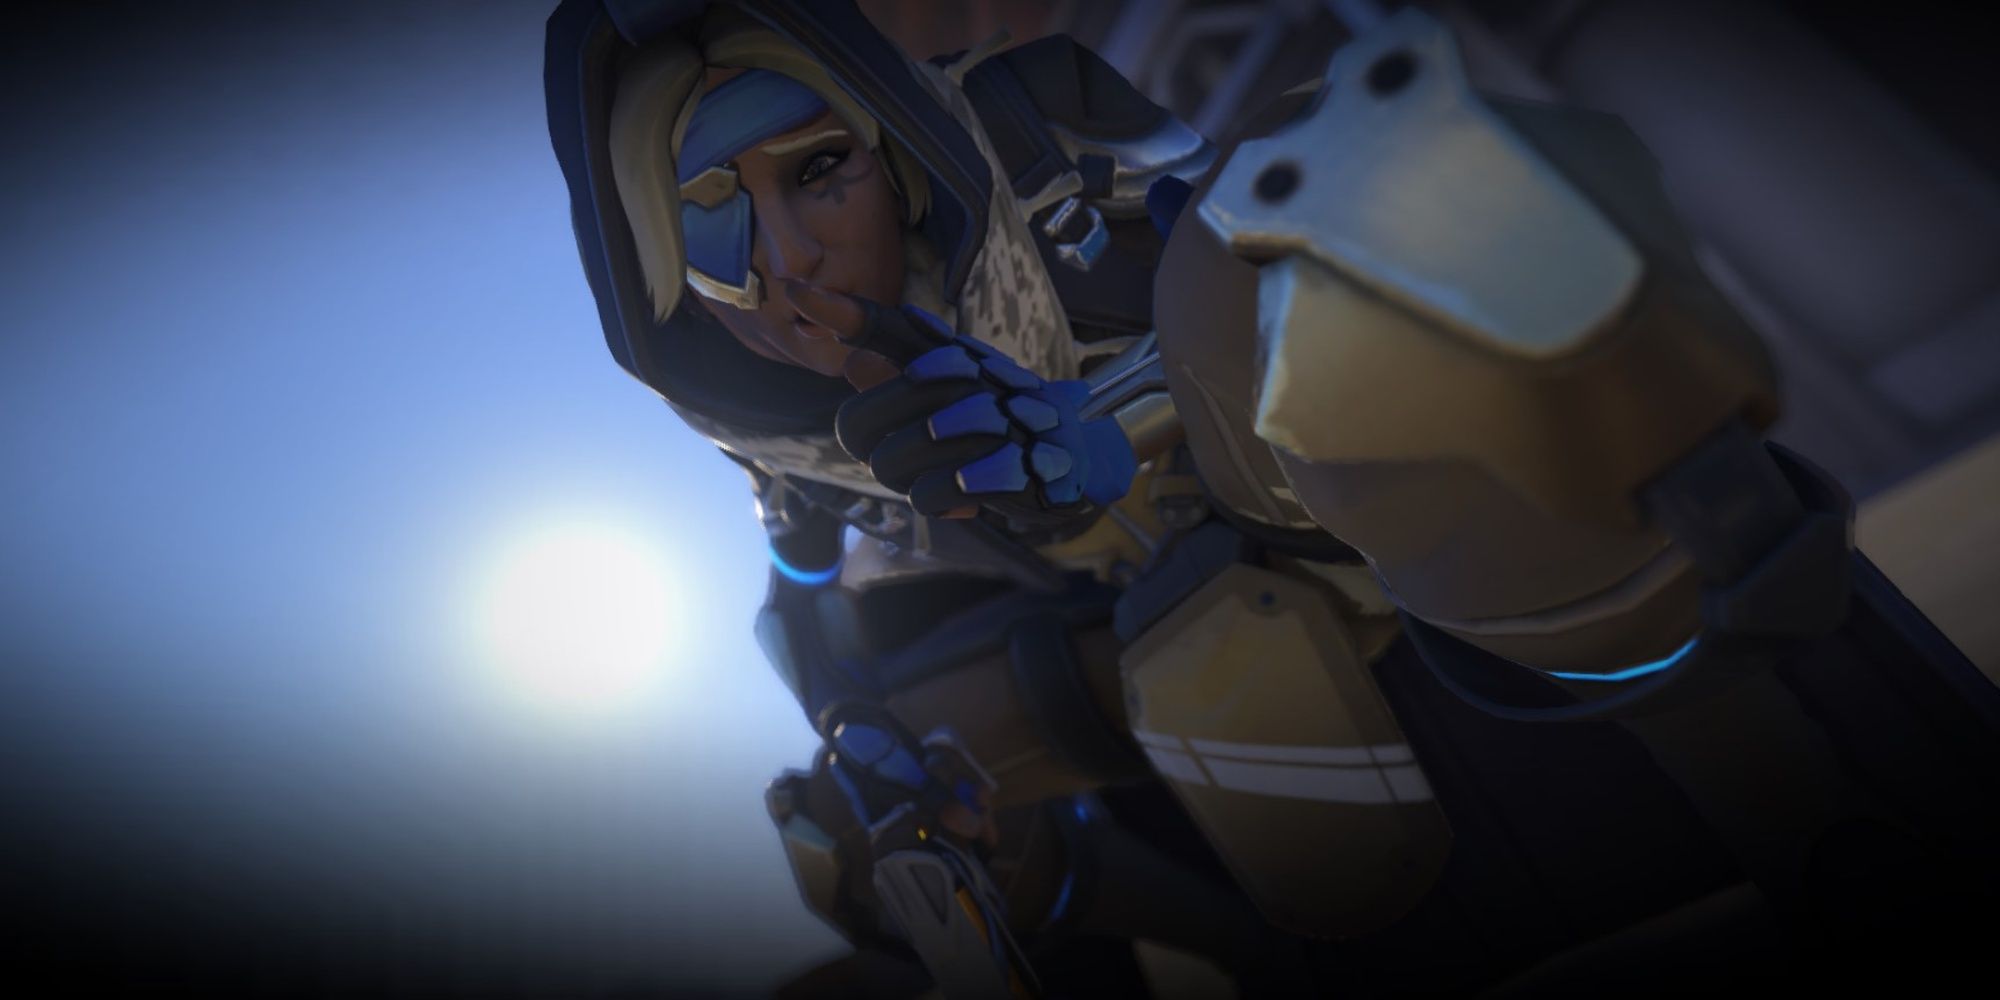 Ana from Overwatch 2 puts a finger to her lips as the viewer falls asleep.